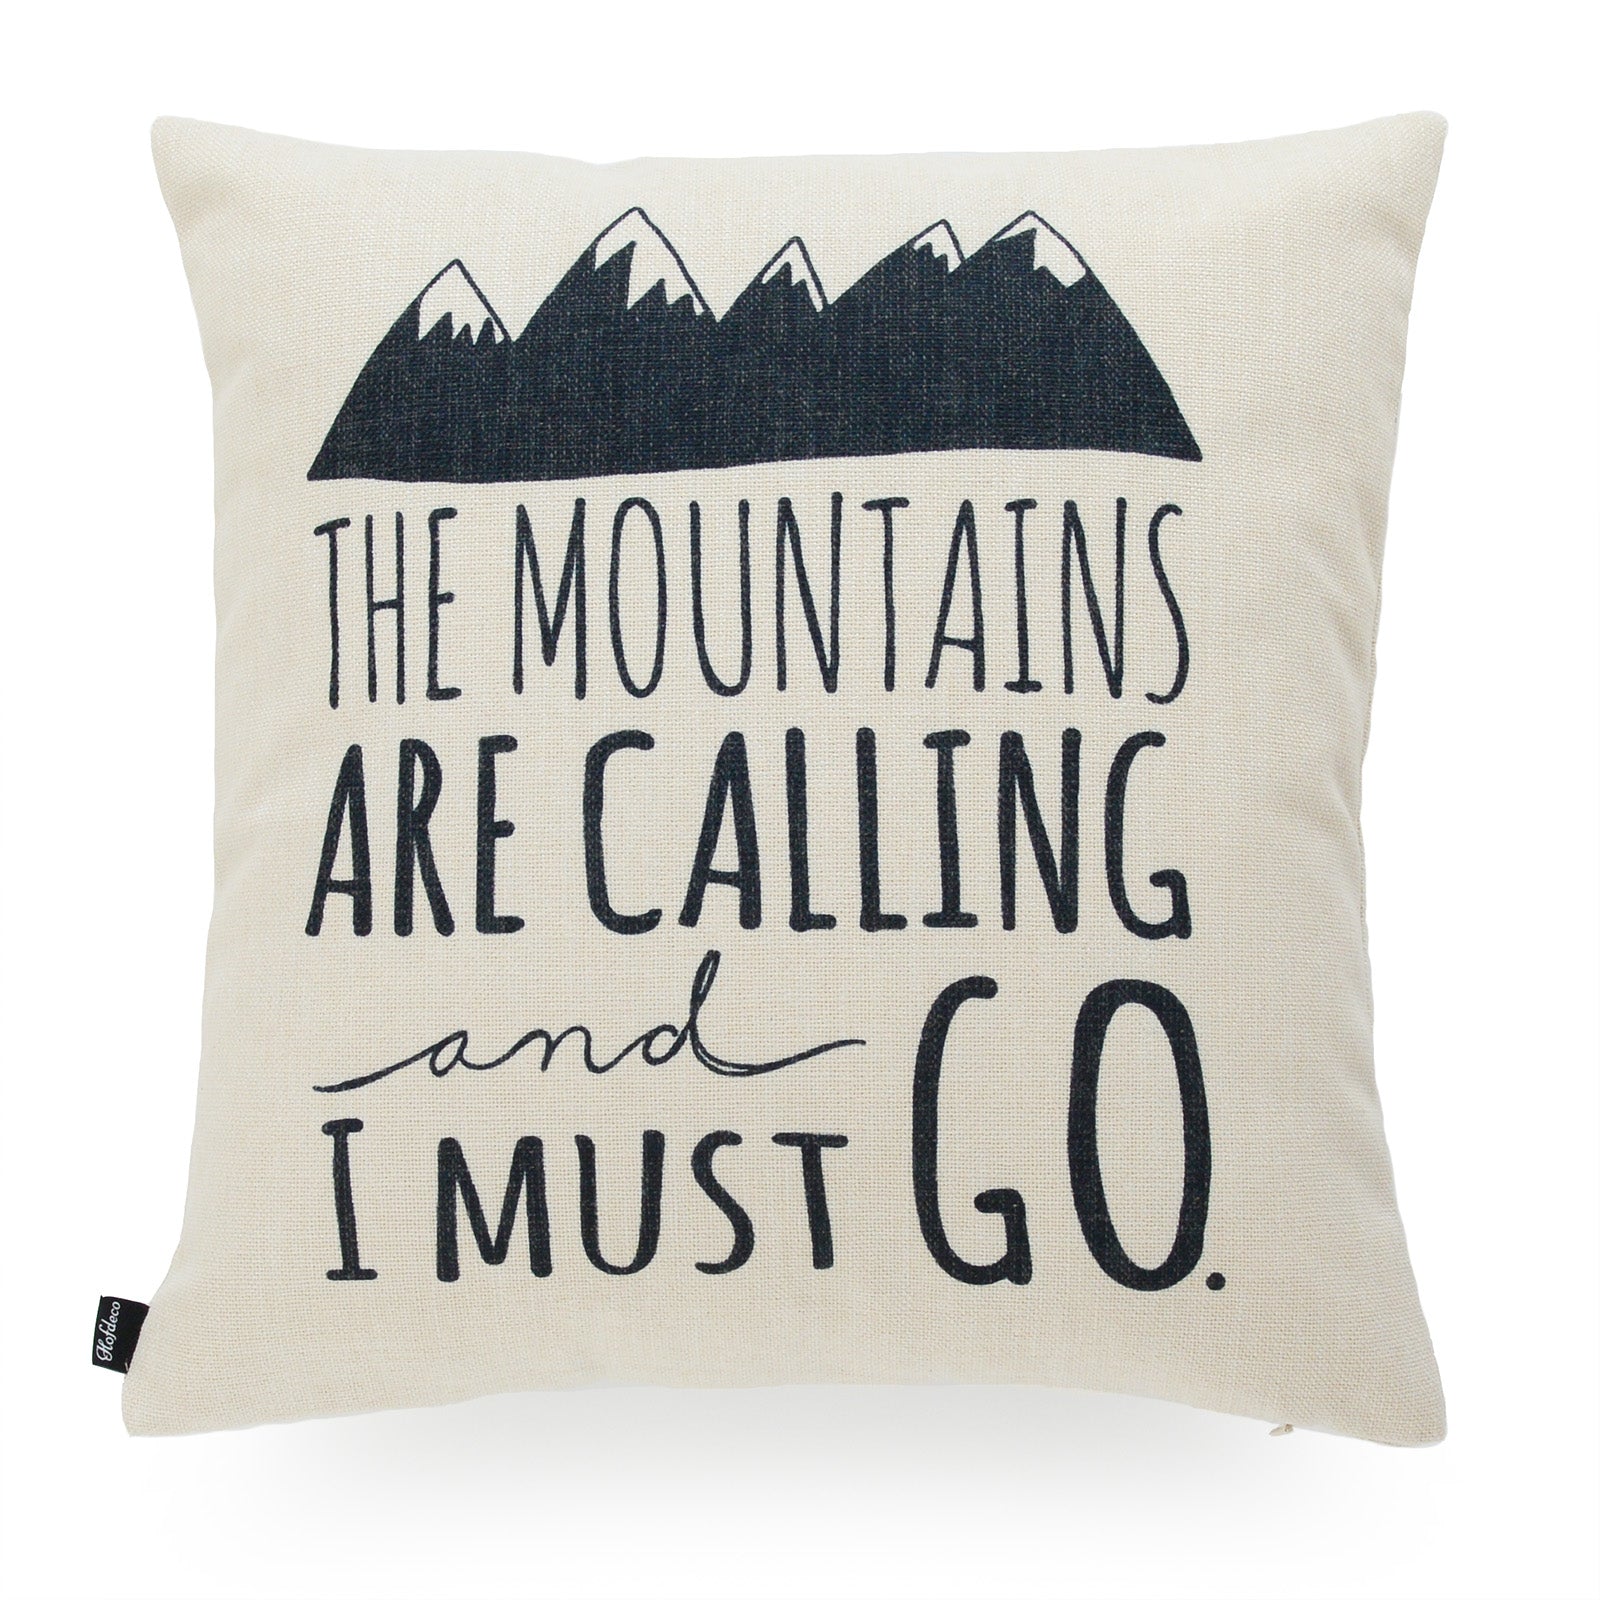 The Mountains Are Calling And I Must Go Pillow Cover, 18"x18"